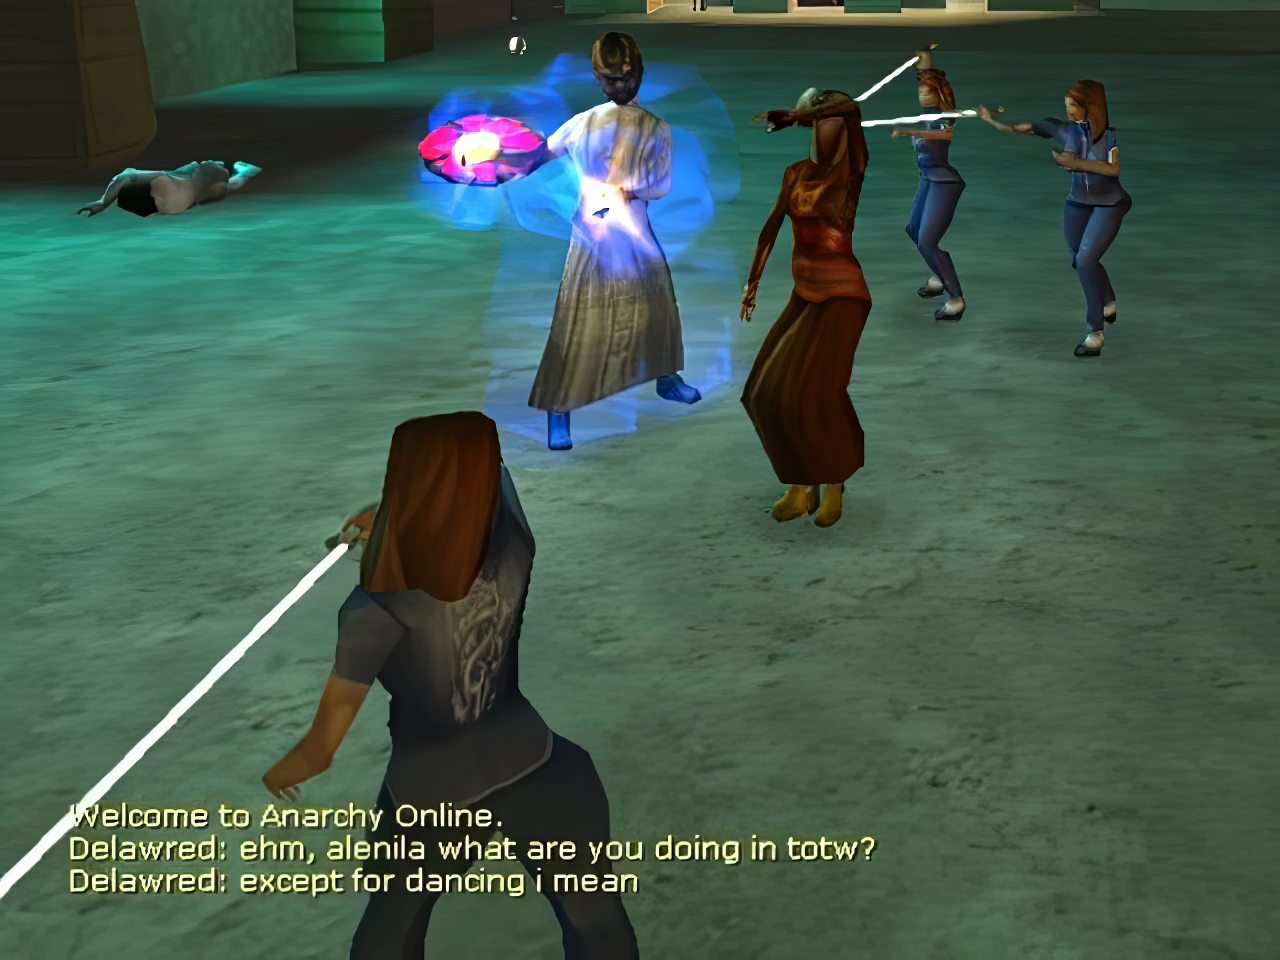  Hui Wai-Keung,  No Play Today,  In-game performance in  Anarchy Online , 2005 (still) 